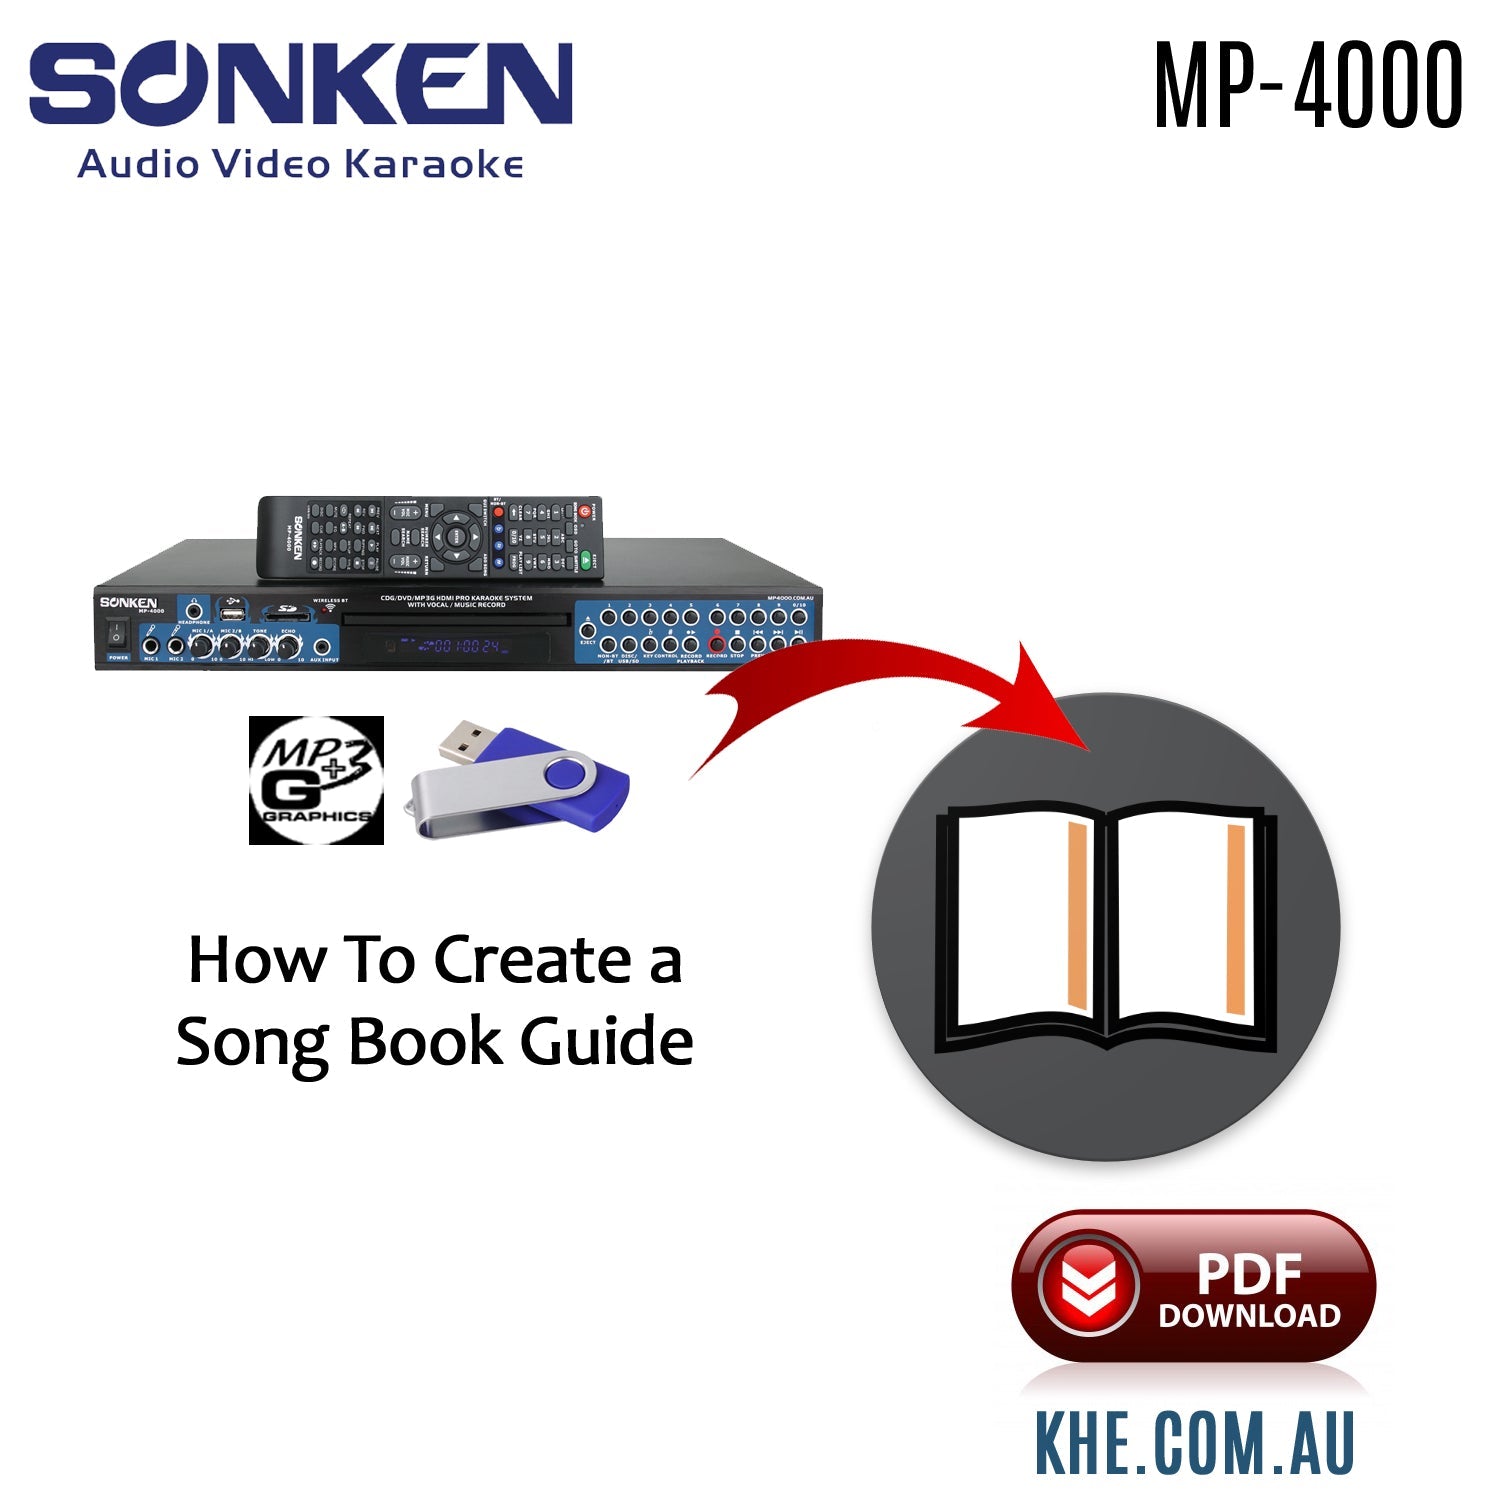 How To Connect Guide - Sonken MP4000 Creating A MP3+G Song Book - Karaoke Home Entertainment